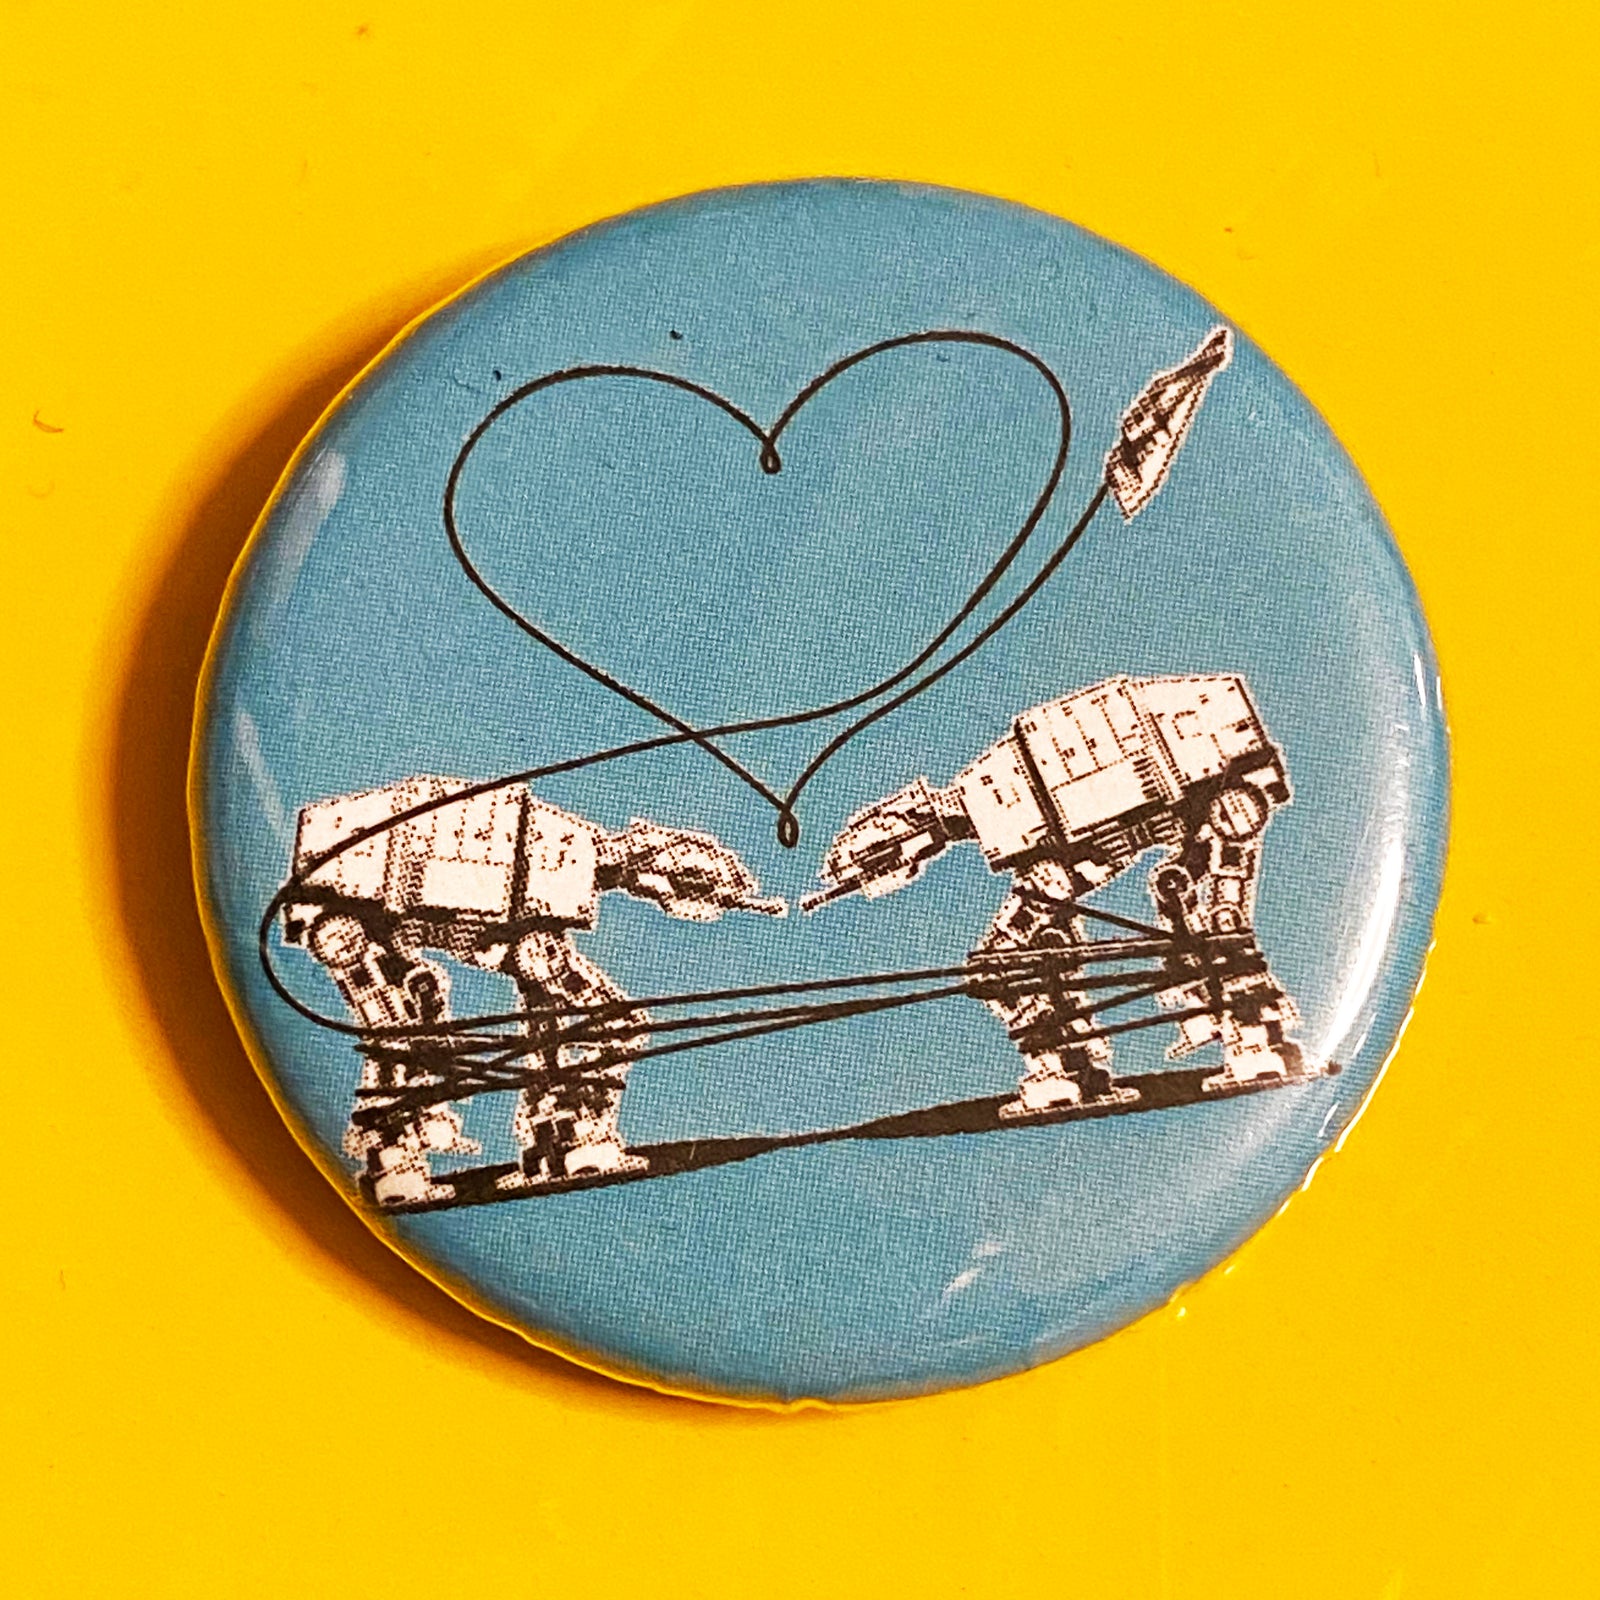 Magnet - 1.25 Inch: Love AT-AT First Sight - Blue